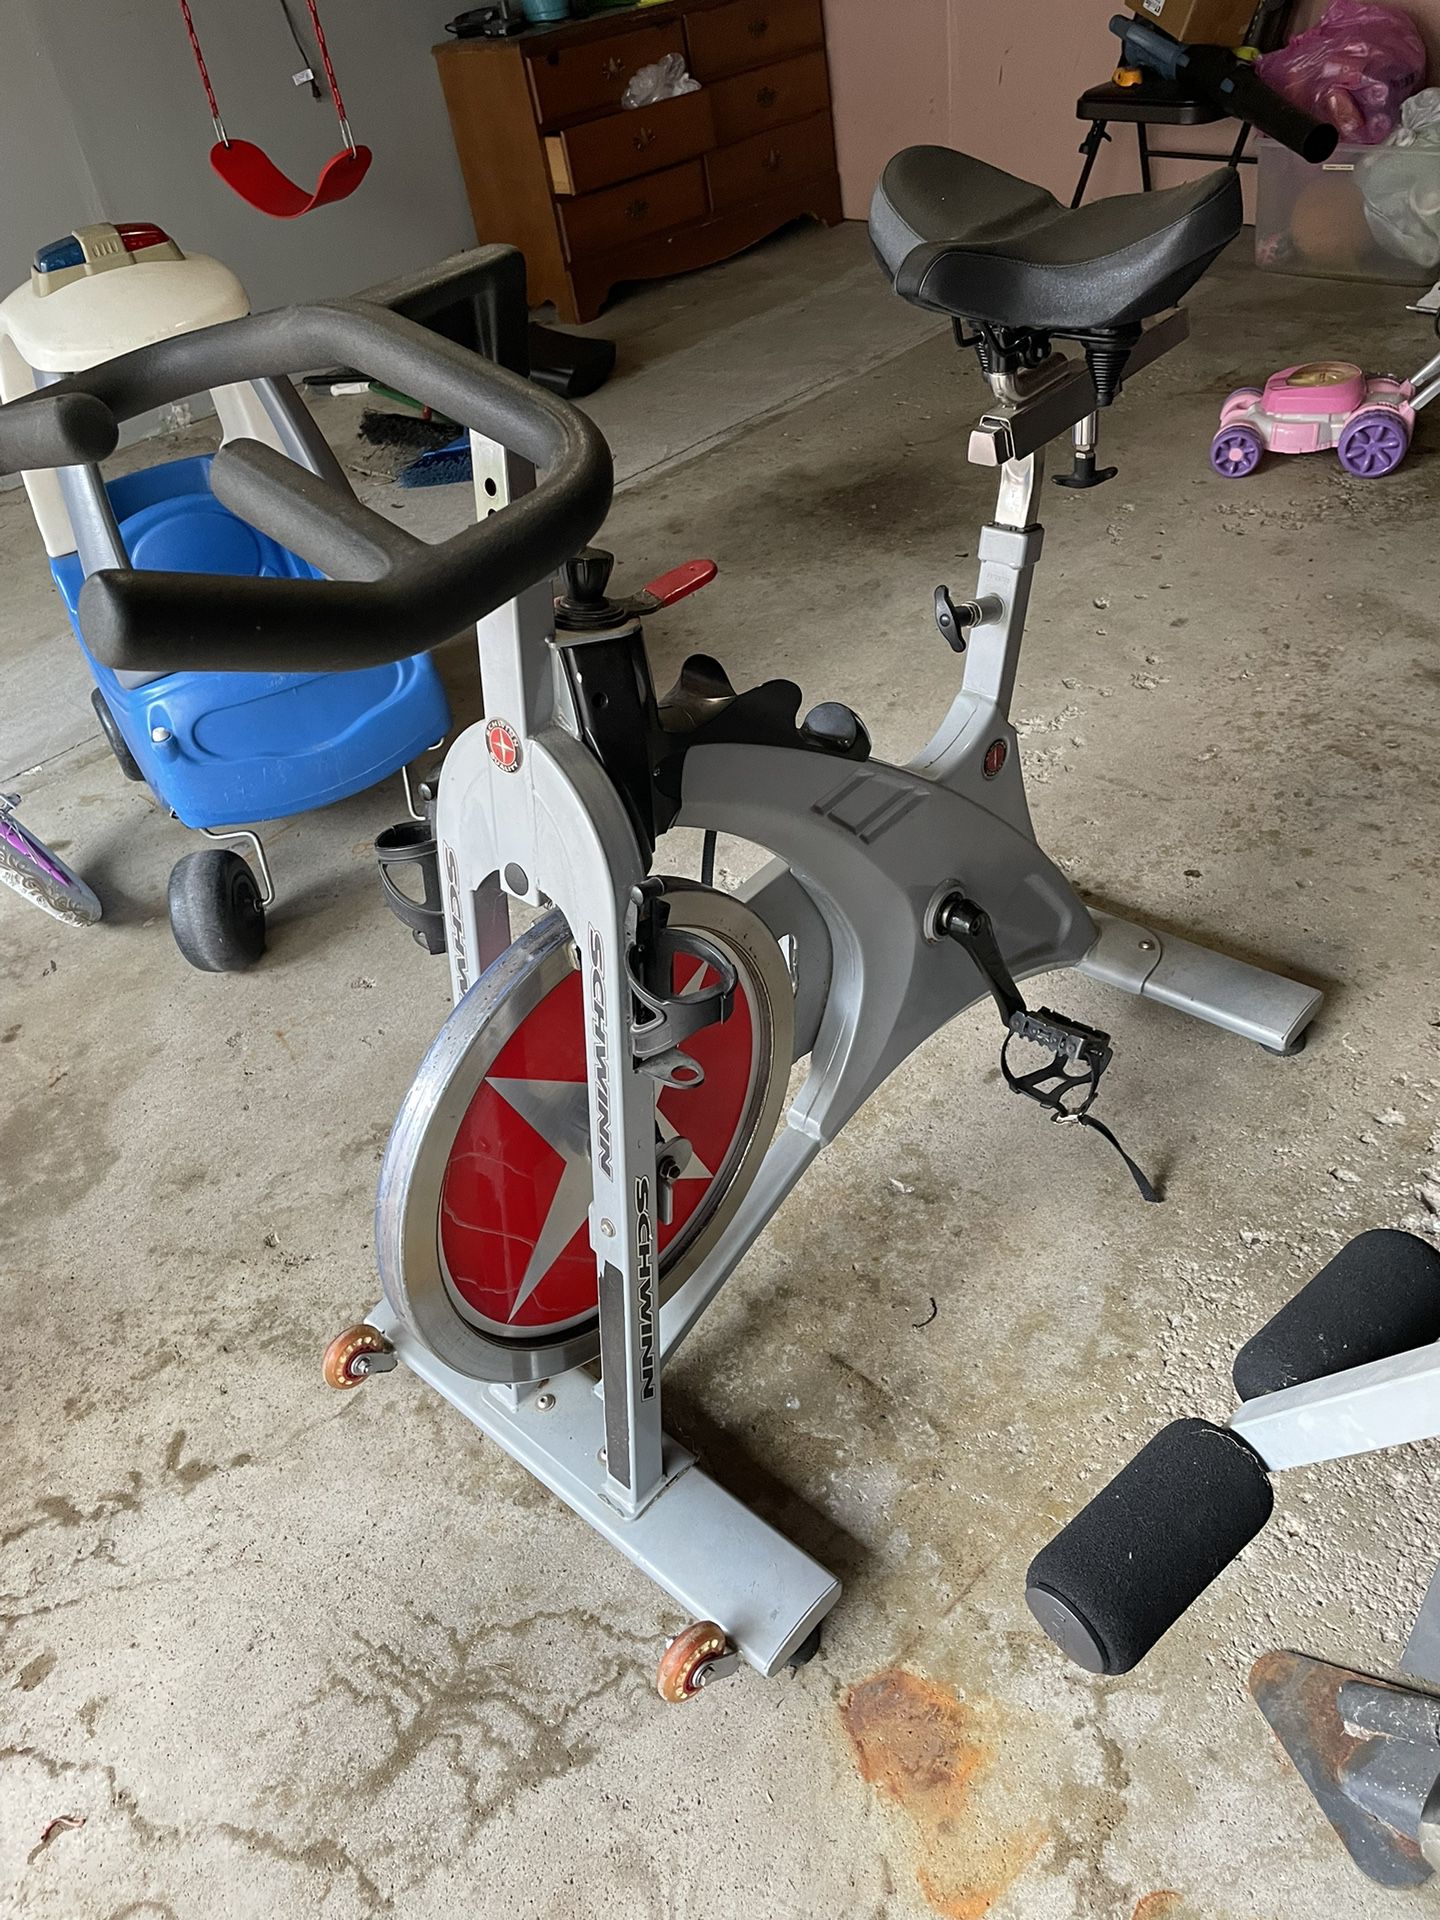 Workout Bicycle 